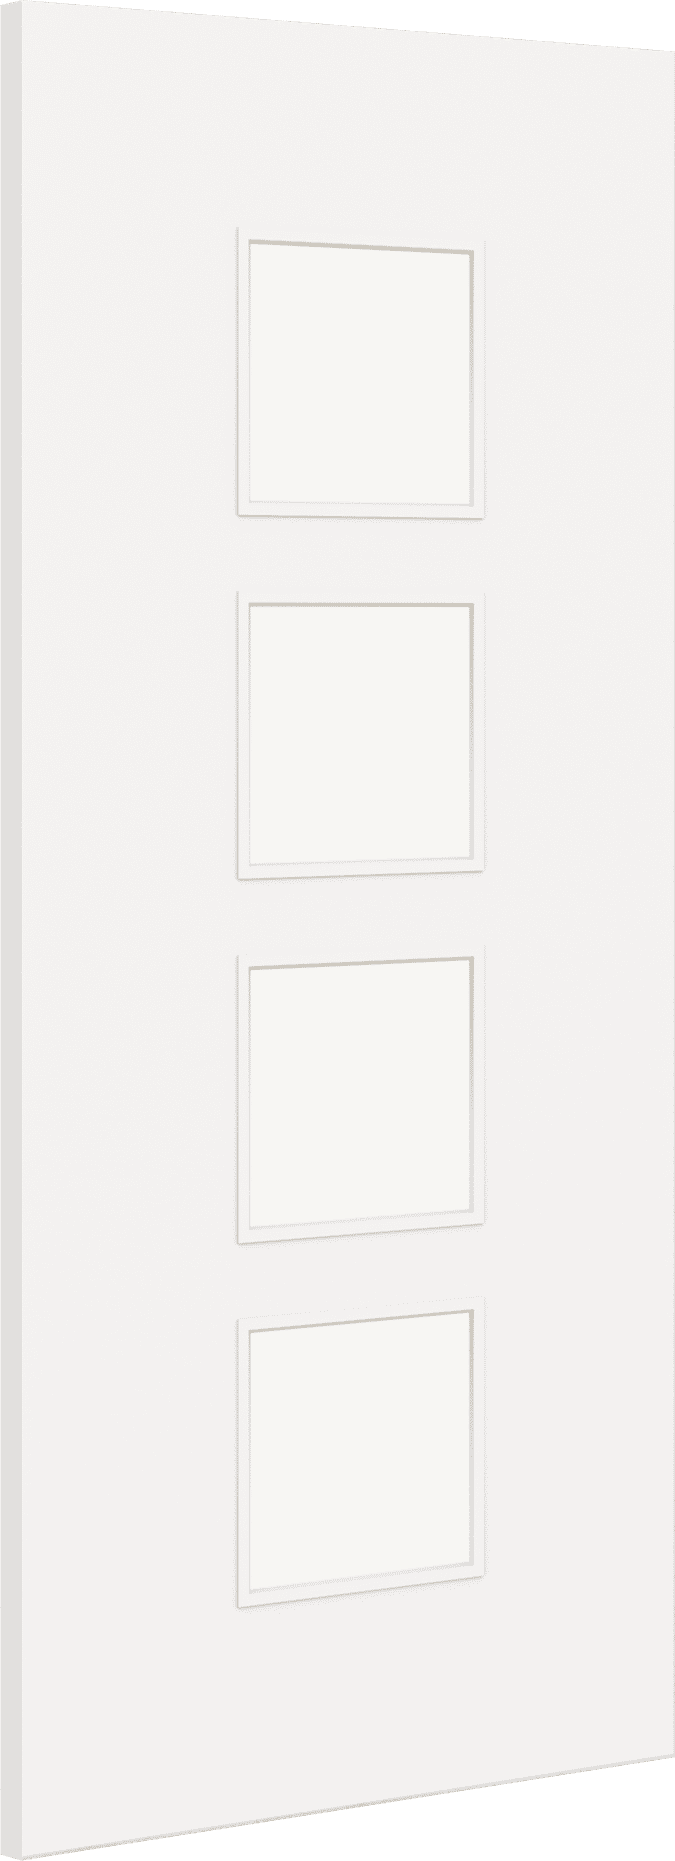 2040mm x 626mm x 44mm Architectural Paint Grade White 09 Frosted Glazed Fire Door Blank